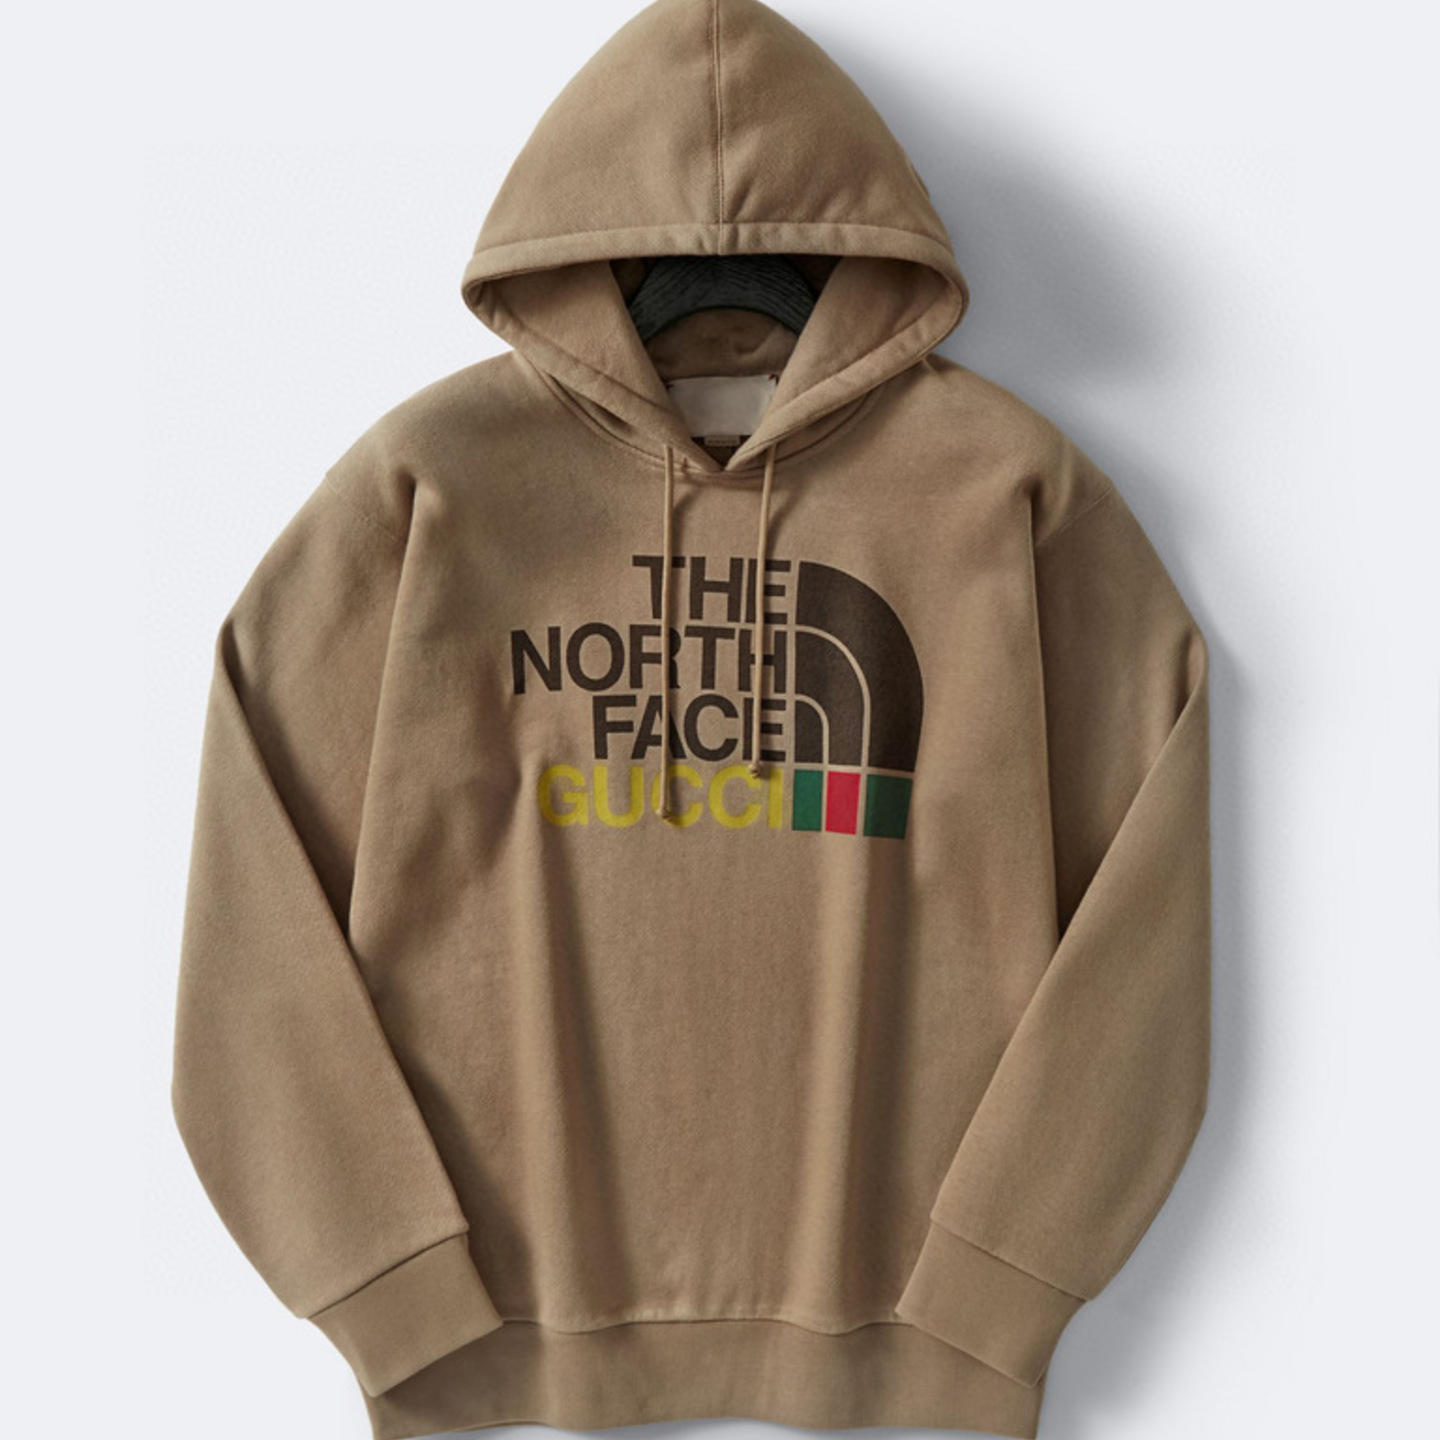 Gucci x The North Face Hoodie